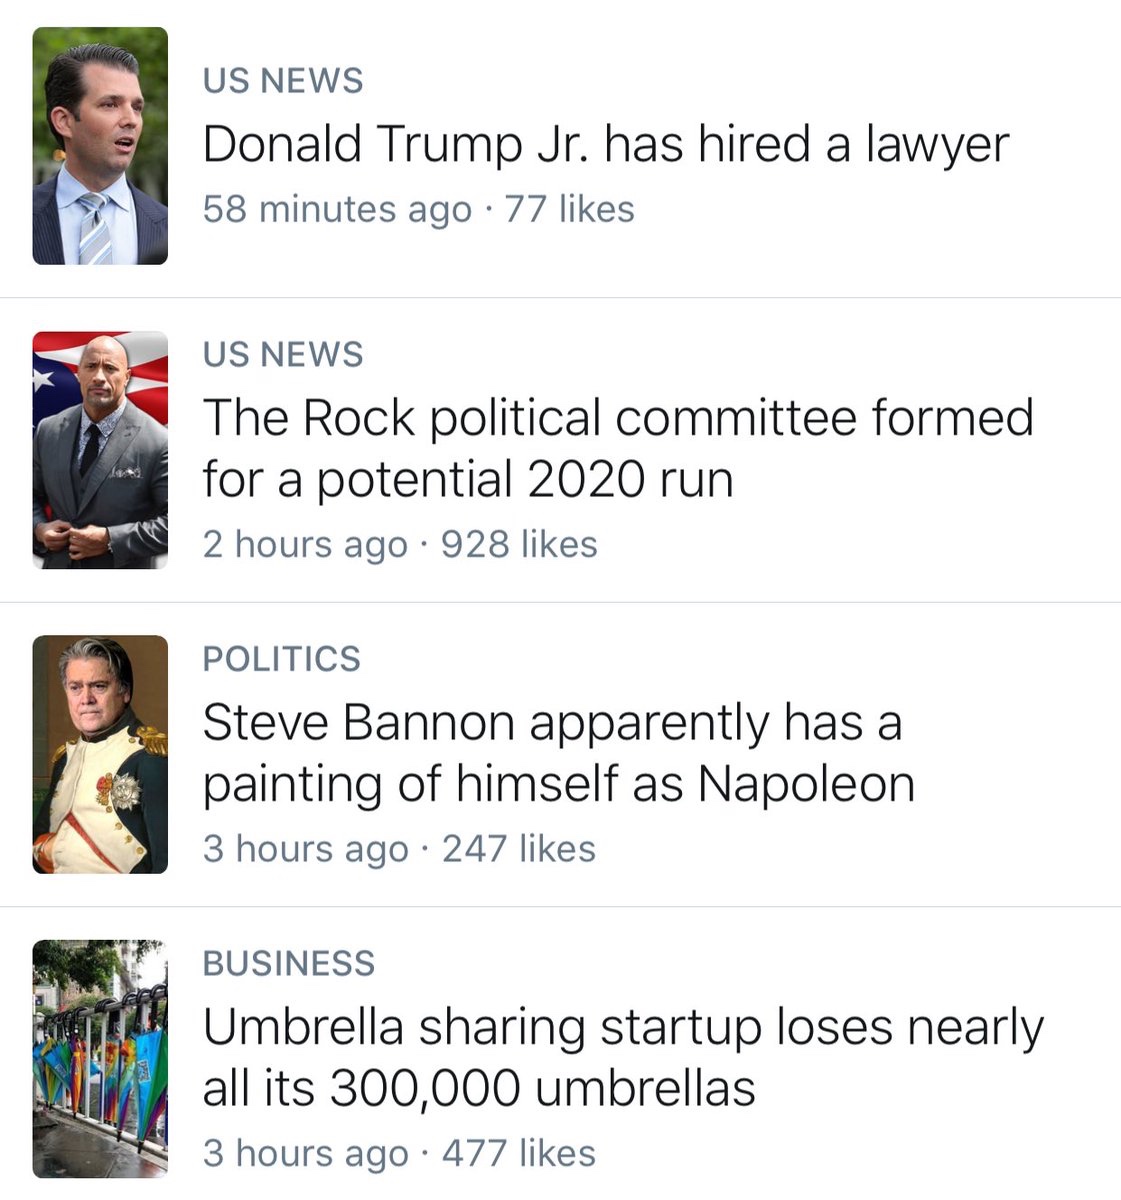 umbrella startup meme - Us News Donald Trump Jr. has hired a lawyer 58 minutes ago 77 Us News The Rock political committee formed for a potential 2020 run 2 hours ago 928 Politics Steve Bannon apparently has a painting of himself as Napoleon 3 hours ago 2